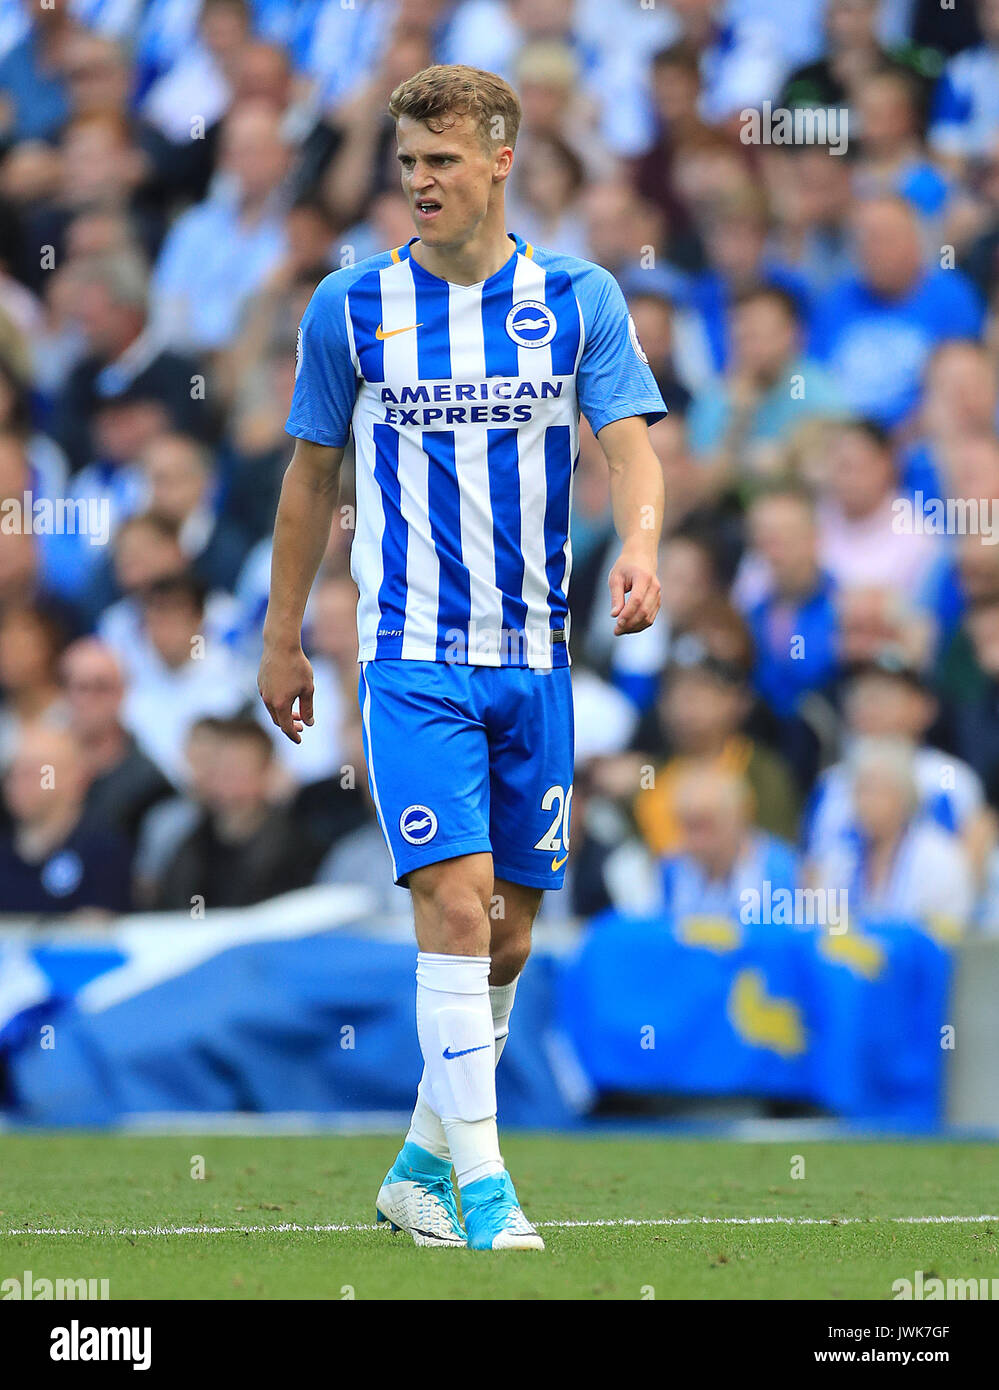 Brighton & Hove Albion's Solly March during the Premier League match at the AMEX Stadium, Brighton. PRESS ASSOCIATION Photo. Picture date: Saturday August 12, 2017. See PA story SOCCER Brighton. Photo credit should read: Gareth Fuller/PA Wire. RESTRICTIONS: No use with unauthorised audio, video, data, fixture lists, club/league logos or 'live' services. Online in-match use limited to 75 images, no video emulation. No use in betting, games or single club/league/player publications. Stock Photo